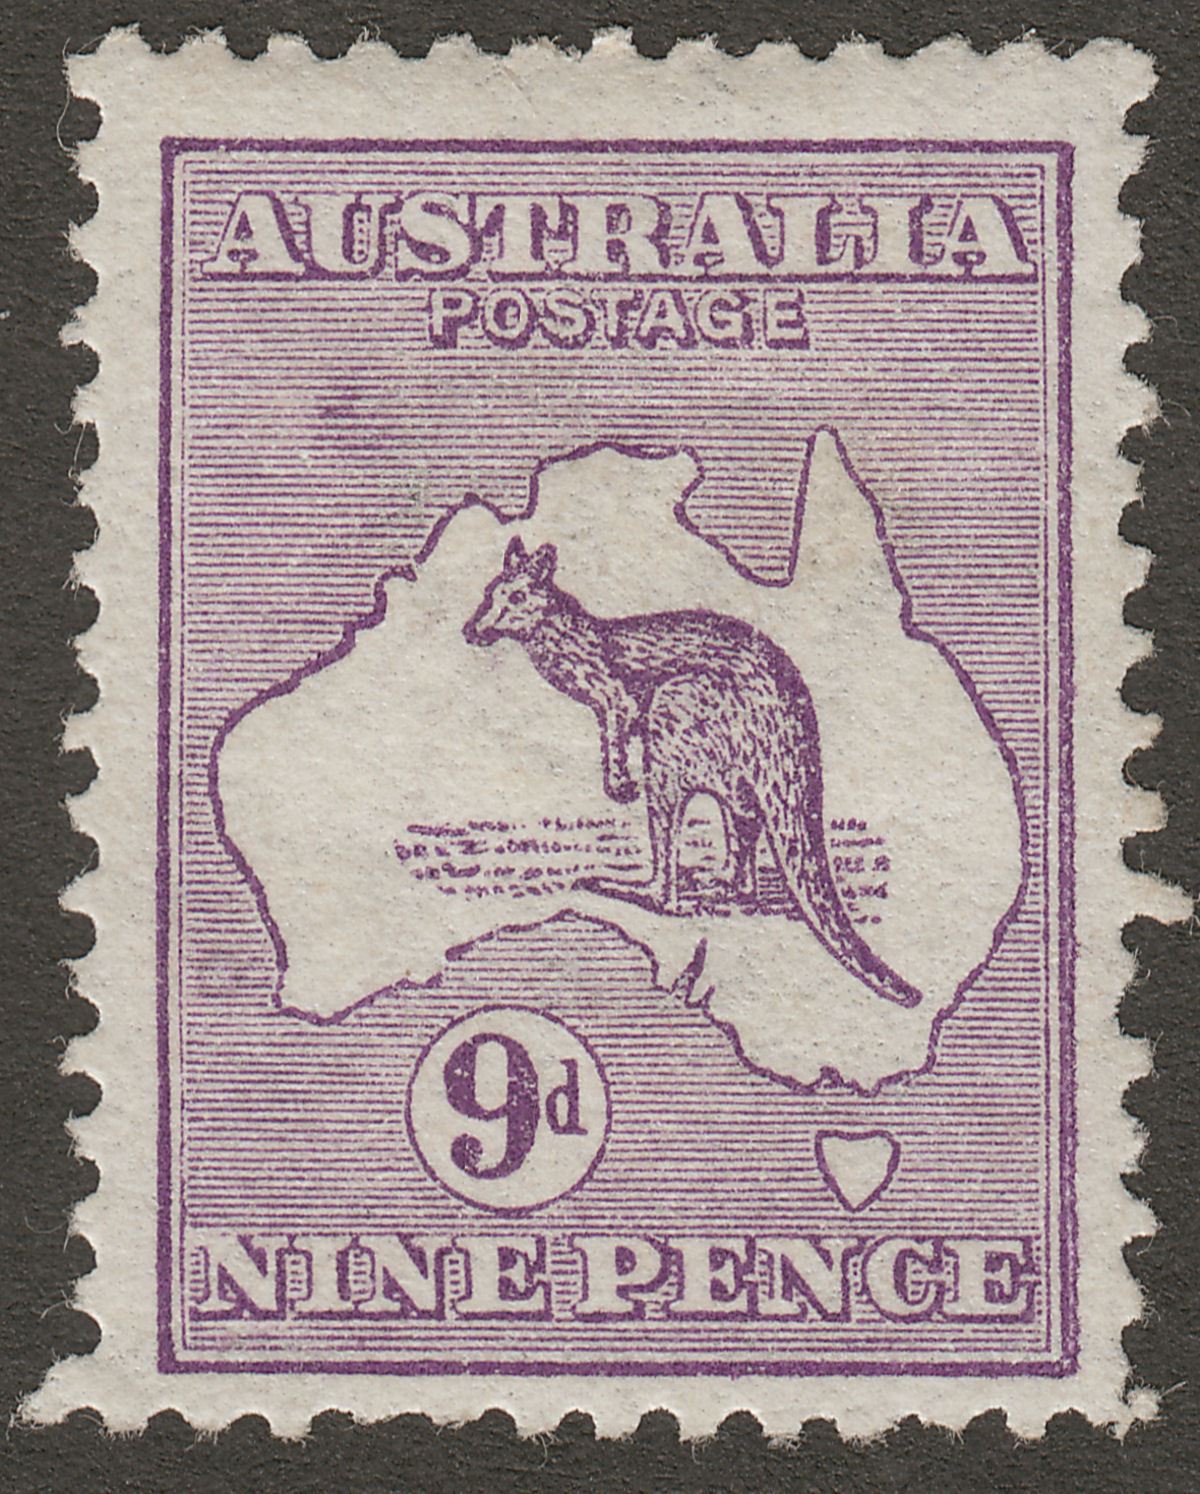 Australia 1913 KGV Roo 9d Violet wmk Wide Crown Mint SG10 cat £80 with tiny thin